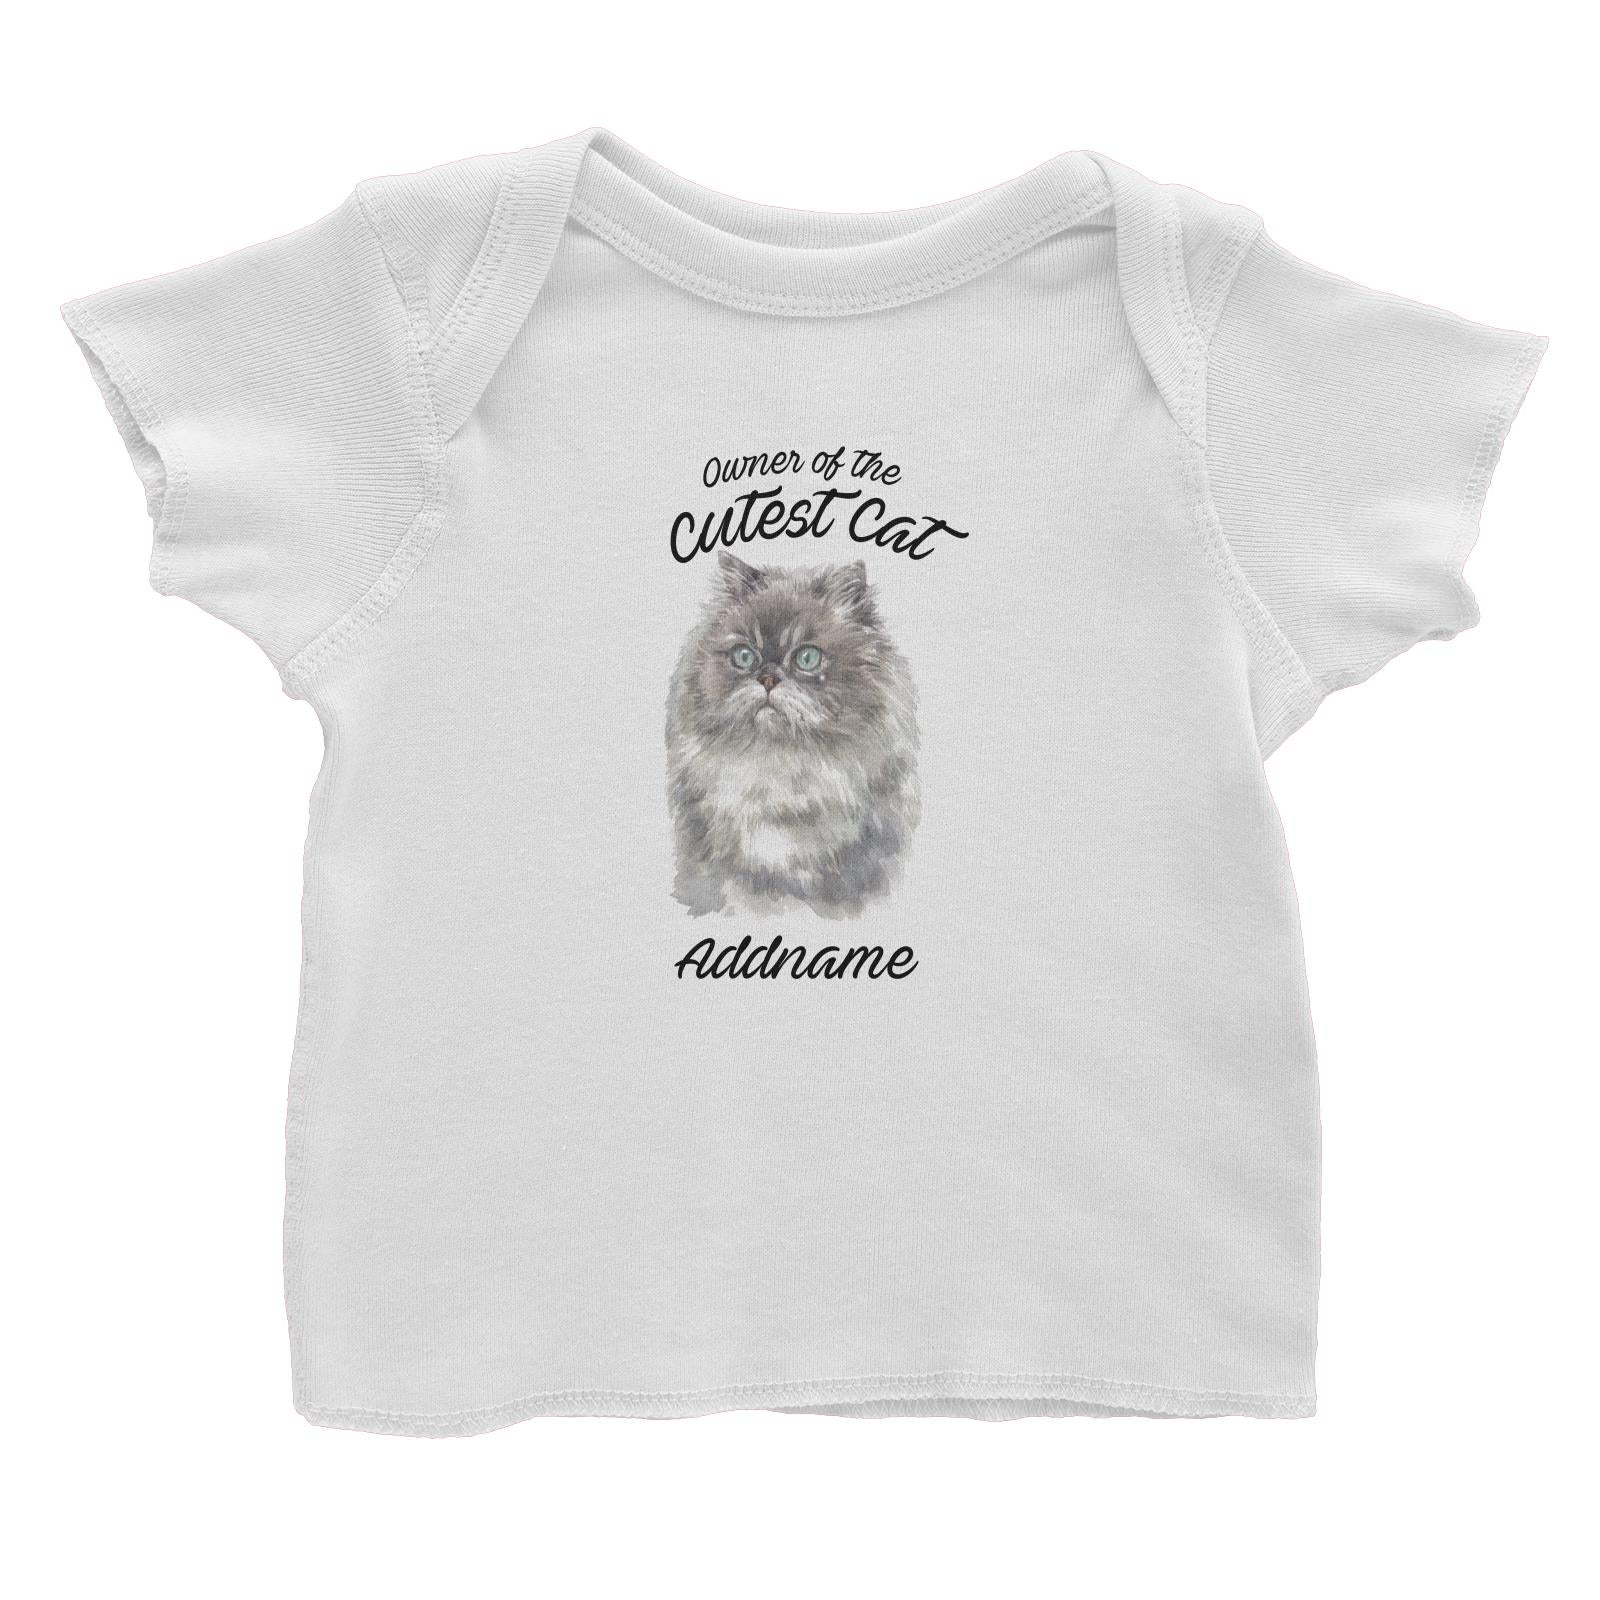 Watercolor Owner Of The Cutest Cat Himalayan Addname Baby T-Shirt